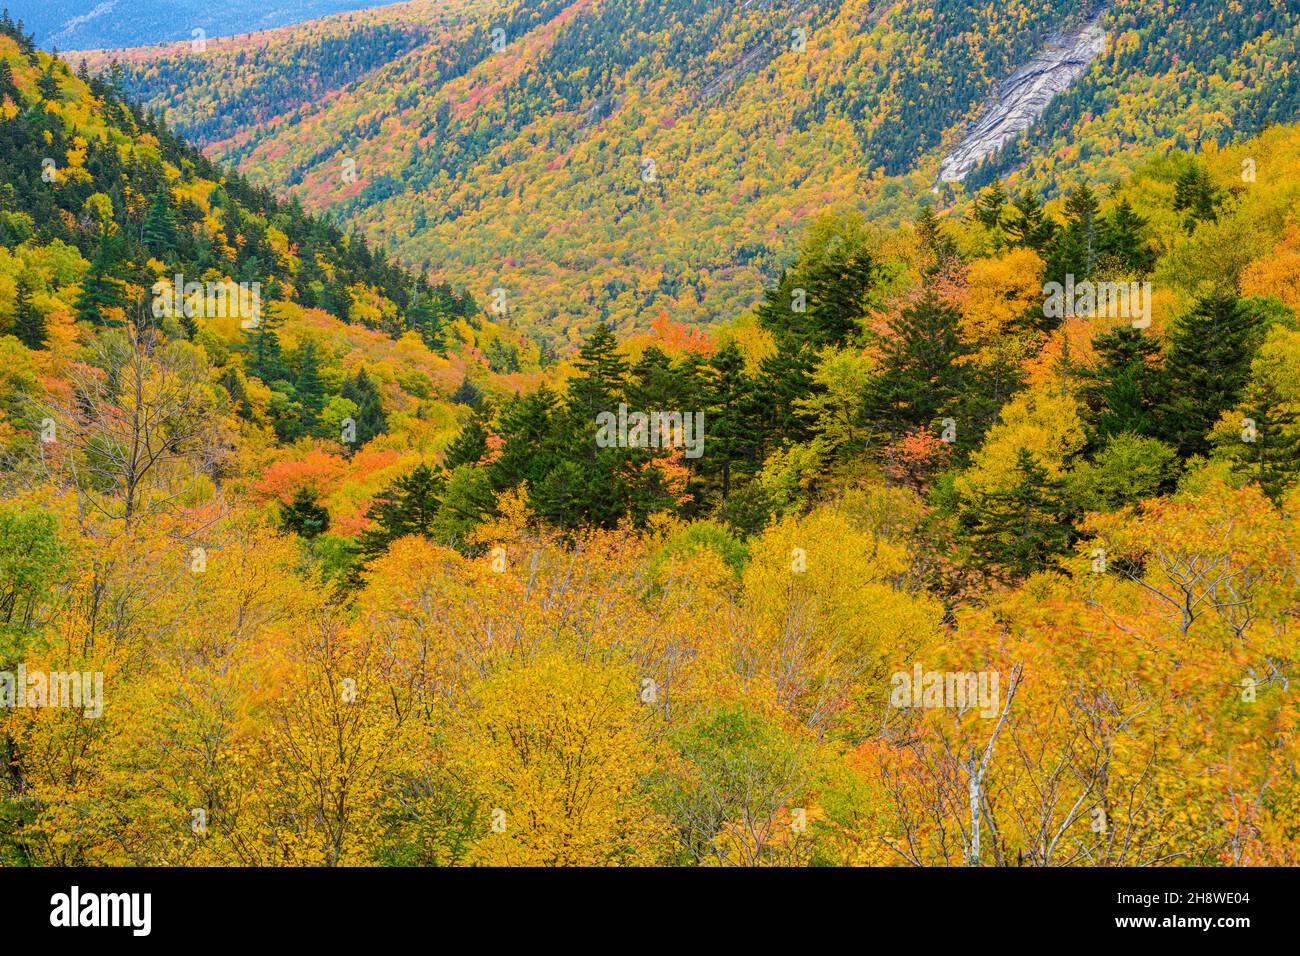 Autumn foliage in the deciduous forest on New England hillsides, Crawford Notch State Park, New Hampshire, USA Stock Photo